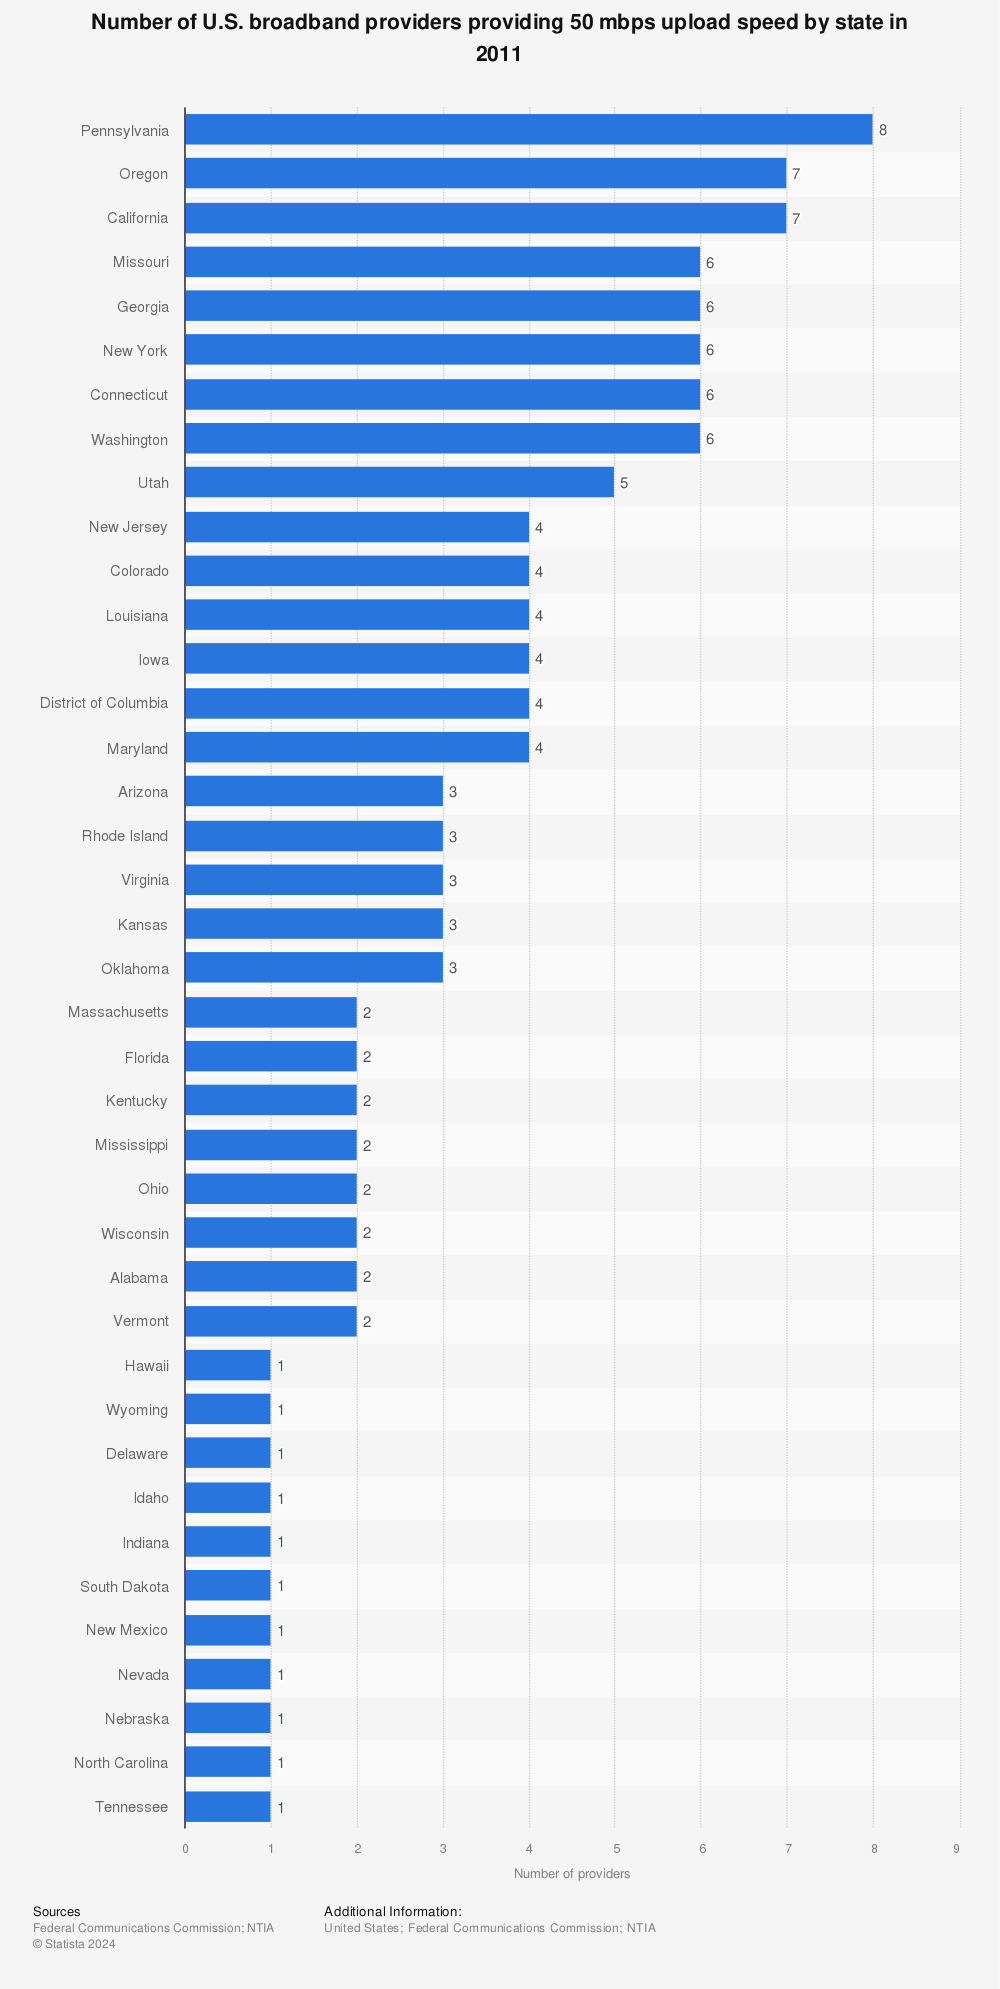 Statistic: Number of U.S. broadband providers providing 50 mbps upload speed by state in 2011 | Statista